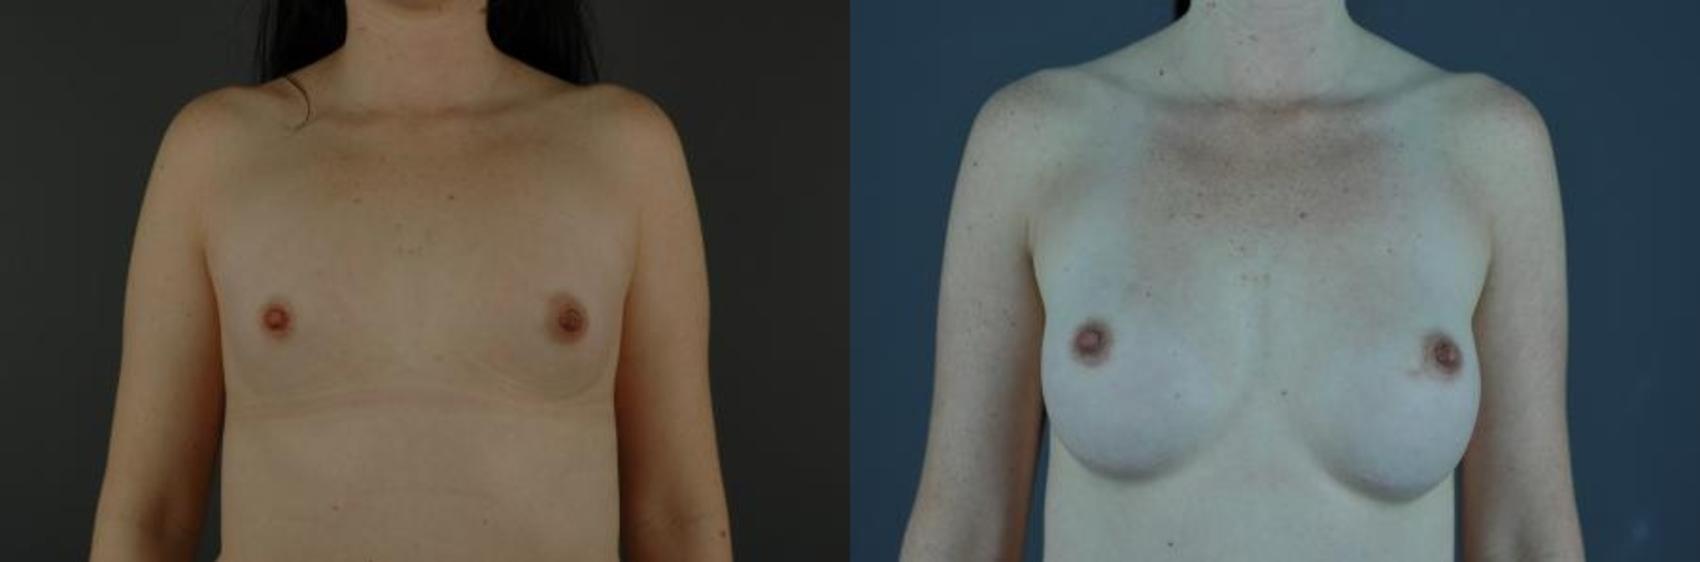 Woman’s A-cup sized breasts before breast augmentation at our Eugene, OR, practice, and her D-cup breasts after the surgery.